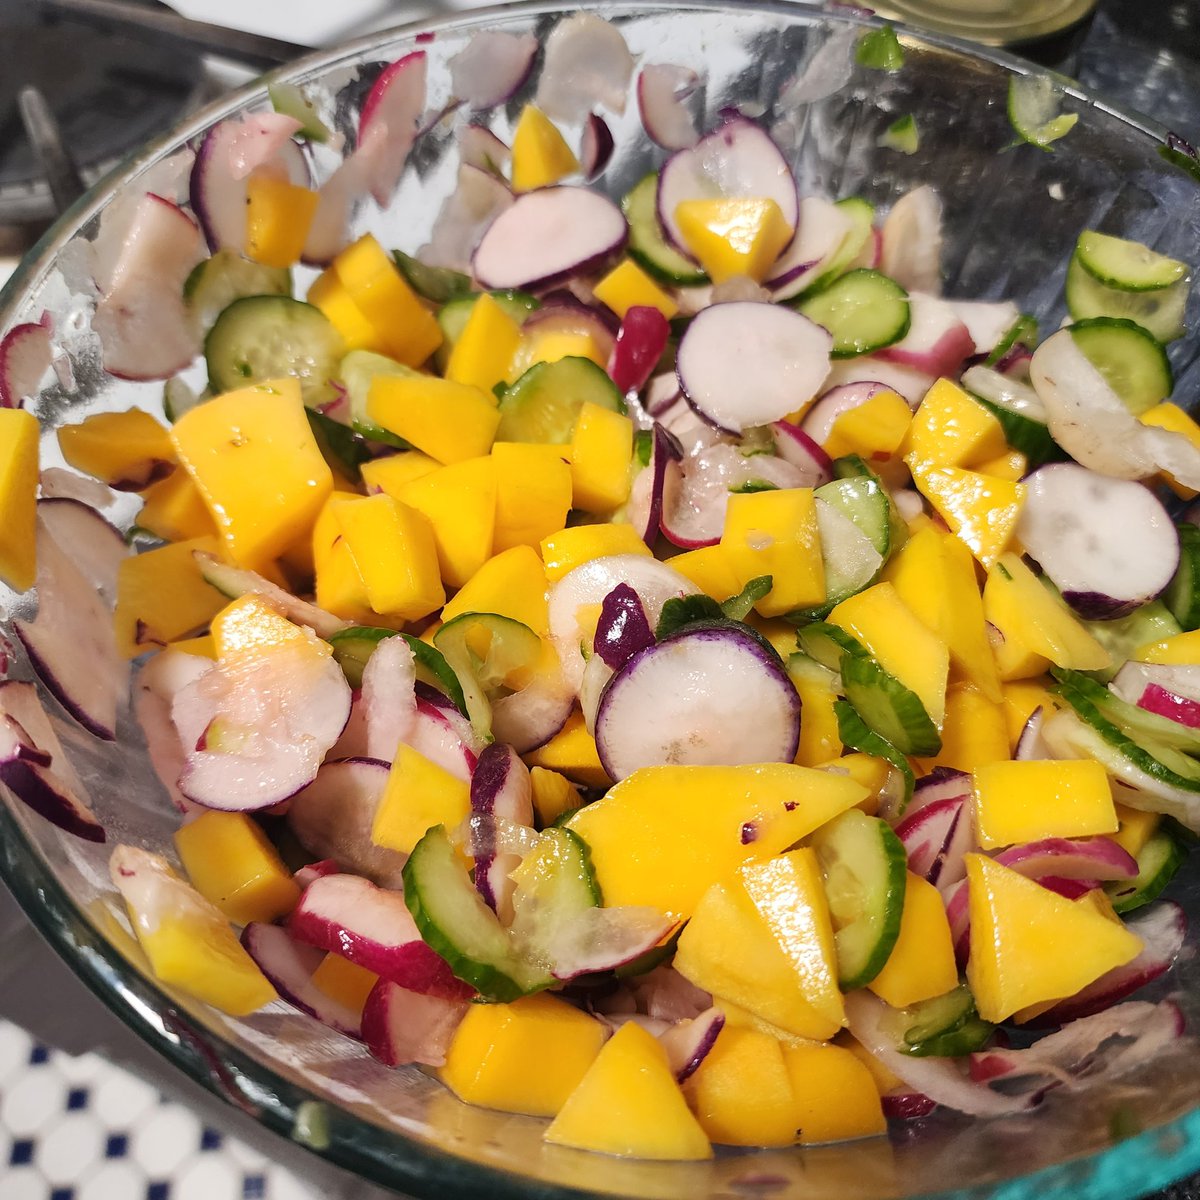 Not all salads have to contain leafy greens...looking forward to having this beautiful mango, cucumber, and (3 types of) radish salad with a homemade lemon dressing this week 😋. #EatingWell #HealthyEating #PlantBasedEating